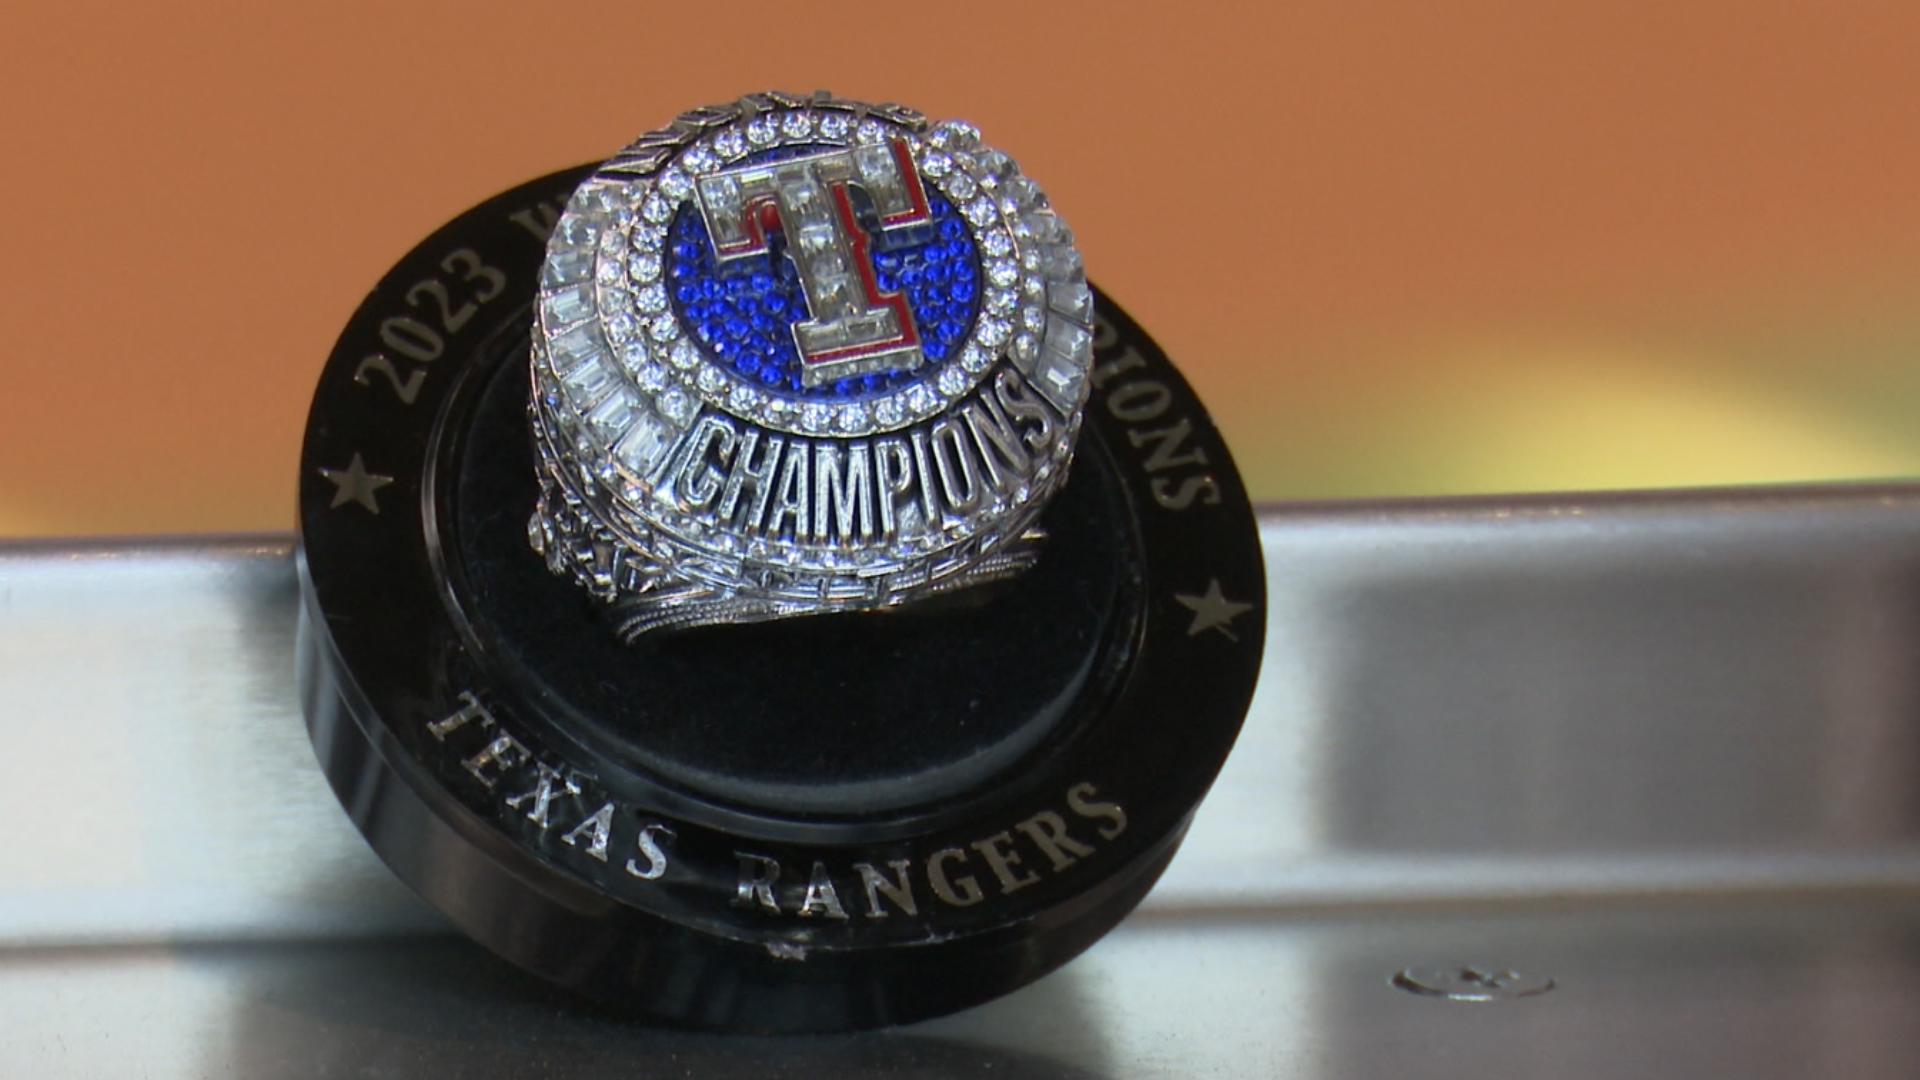 Chris Sadeghi has a look at the Texas Rangers World Series replica ring the club is giving away.